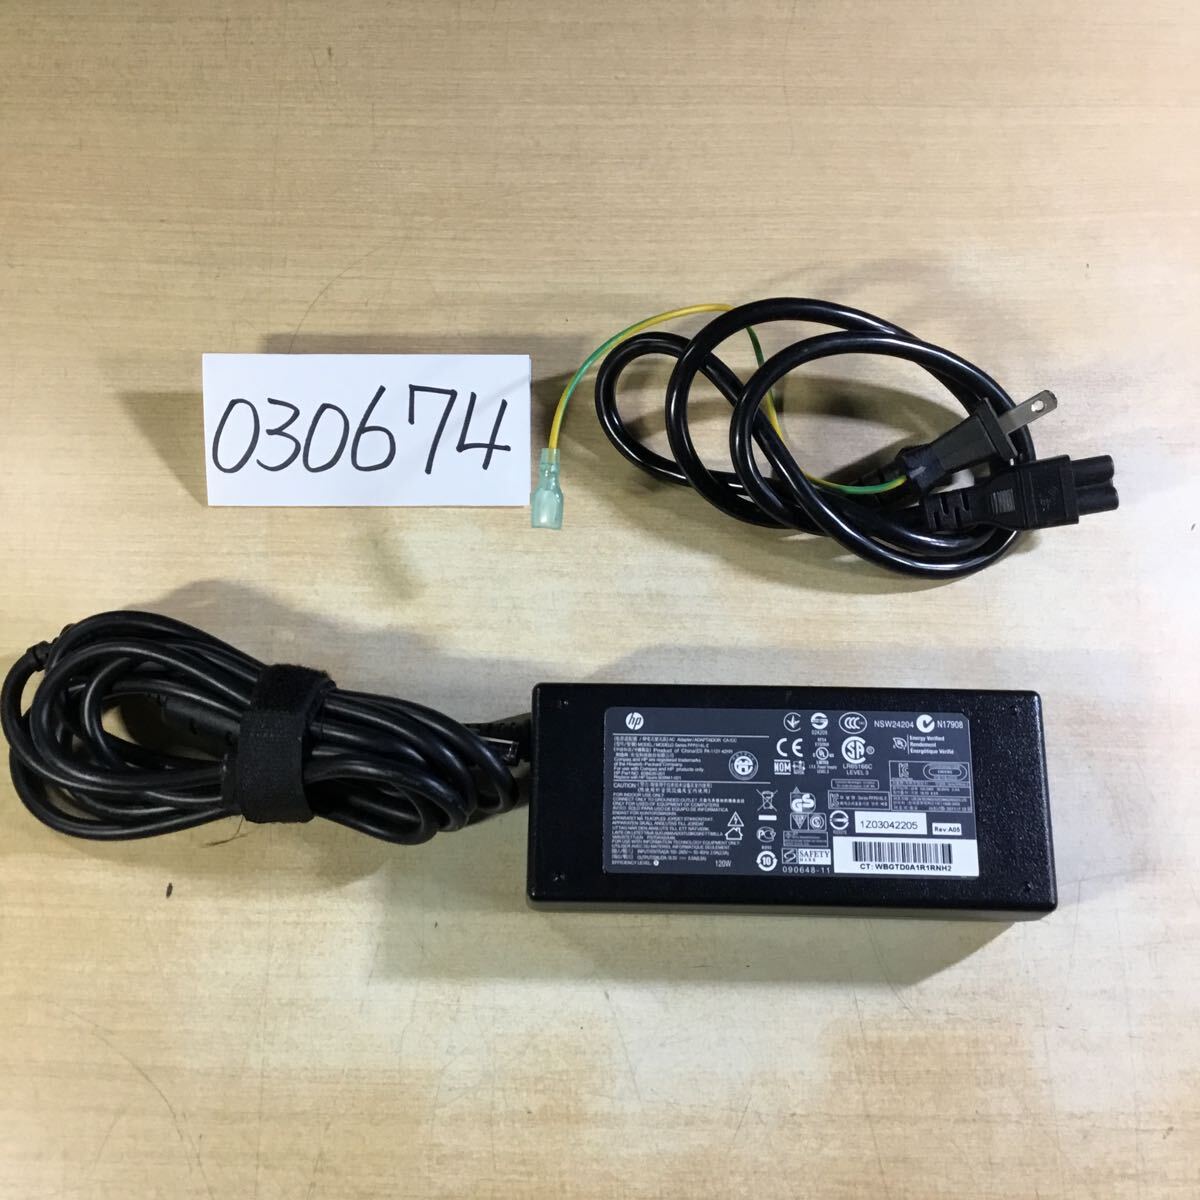 [ free shipping ](030674C) HP PPP016L-E 18.5V6.5A 120W genuine products AC adapter Mickey cable attaching secondhand goods 